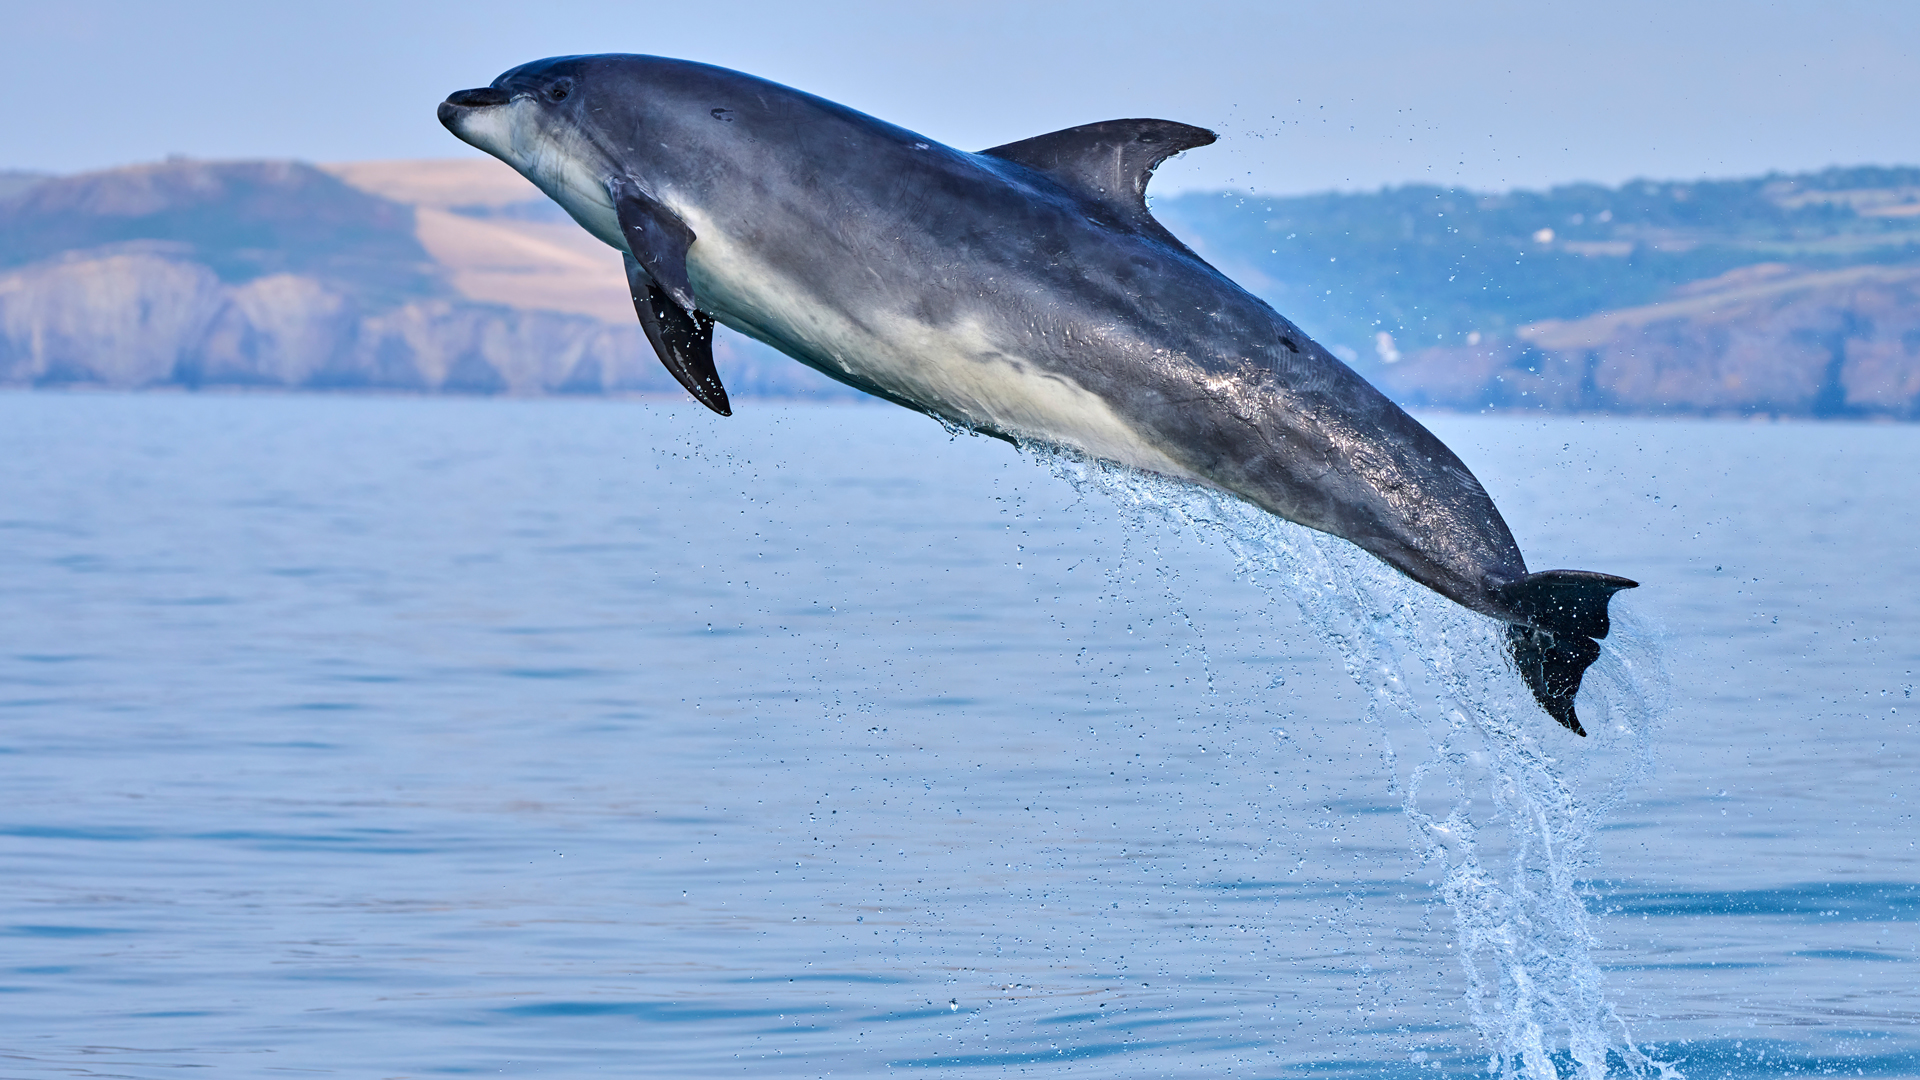 Dolphin spotted at Cardigan Bay